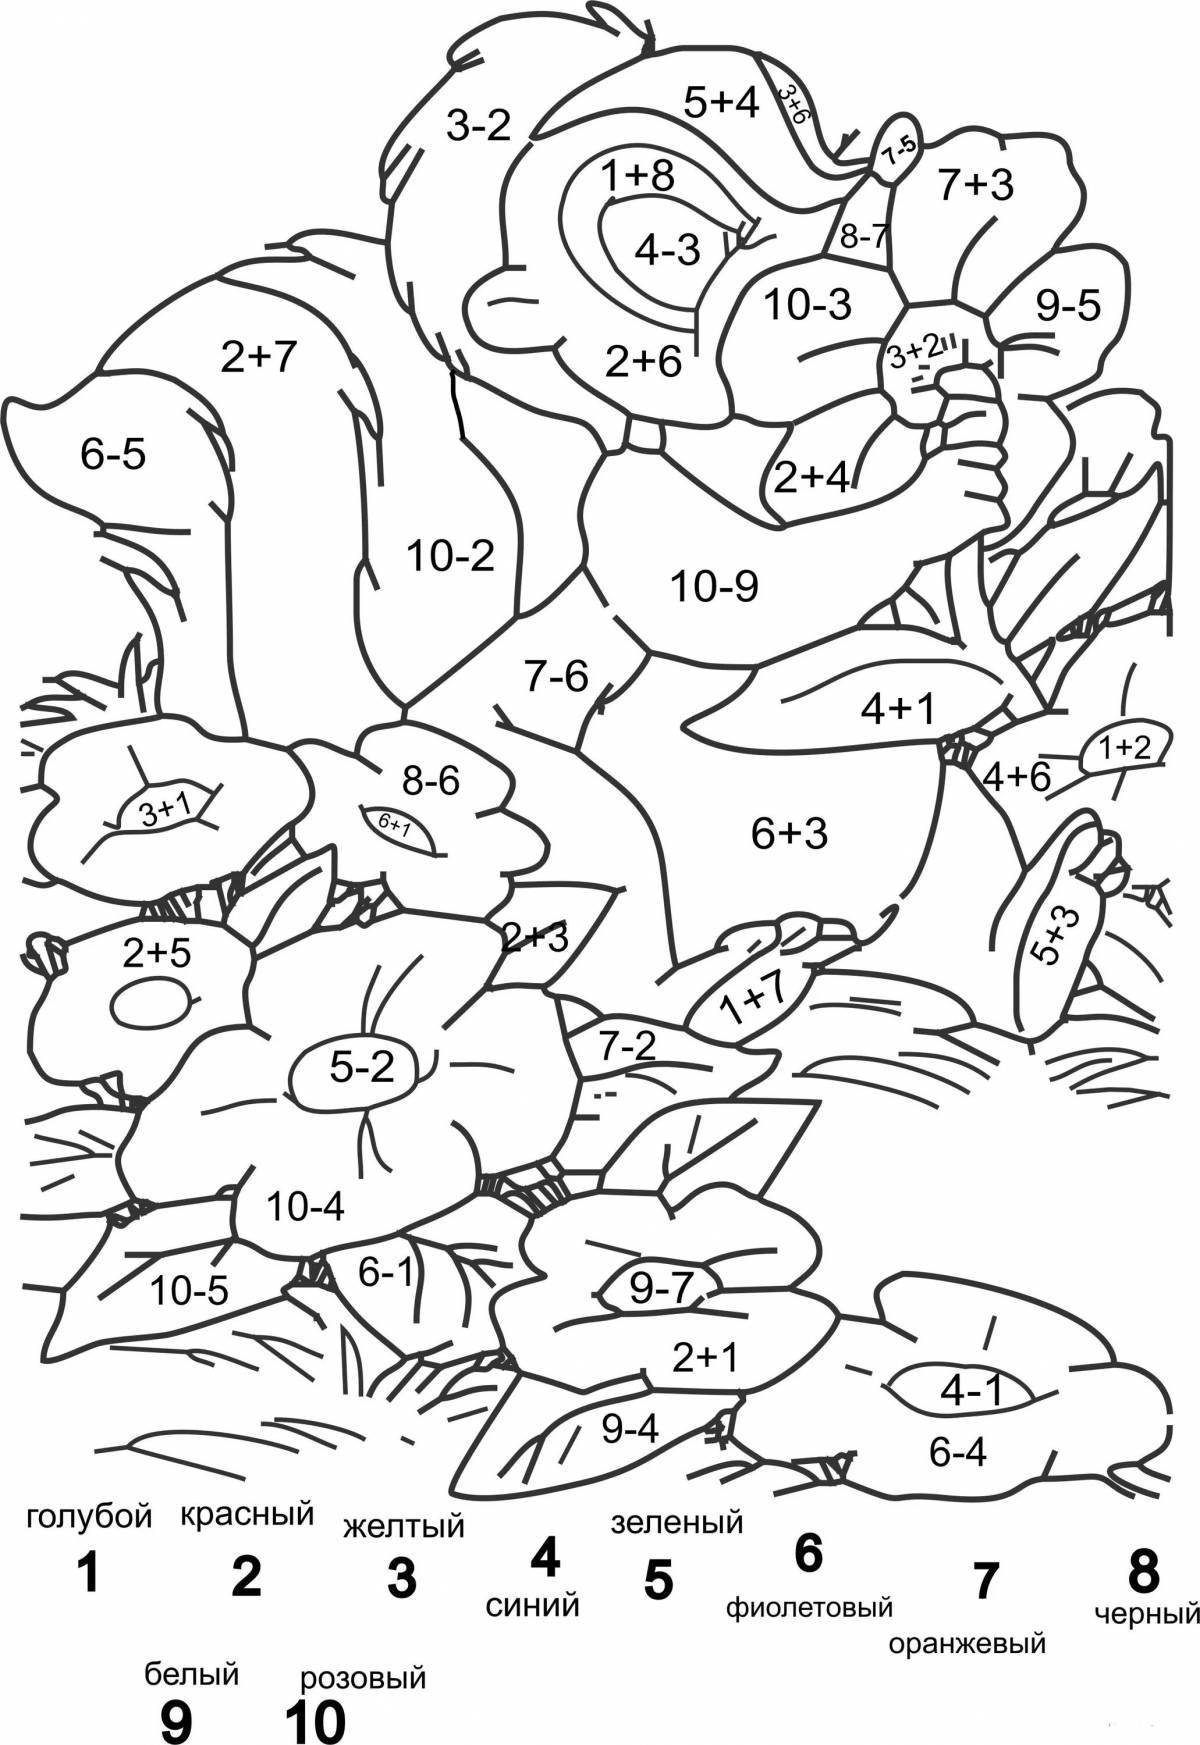 Intriguing math coloring book for 6-7 year olds